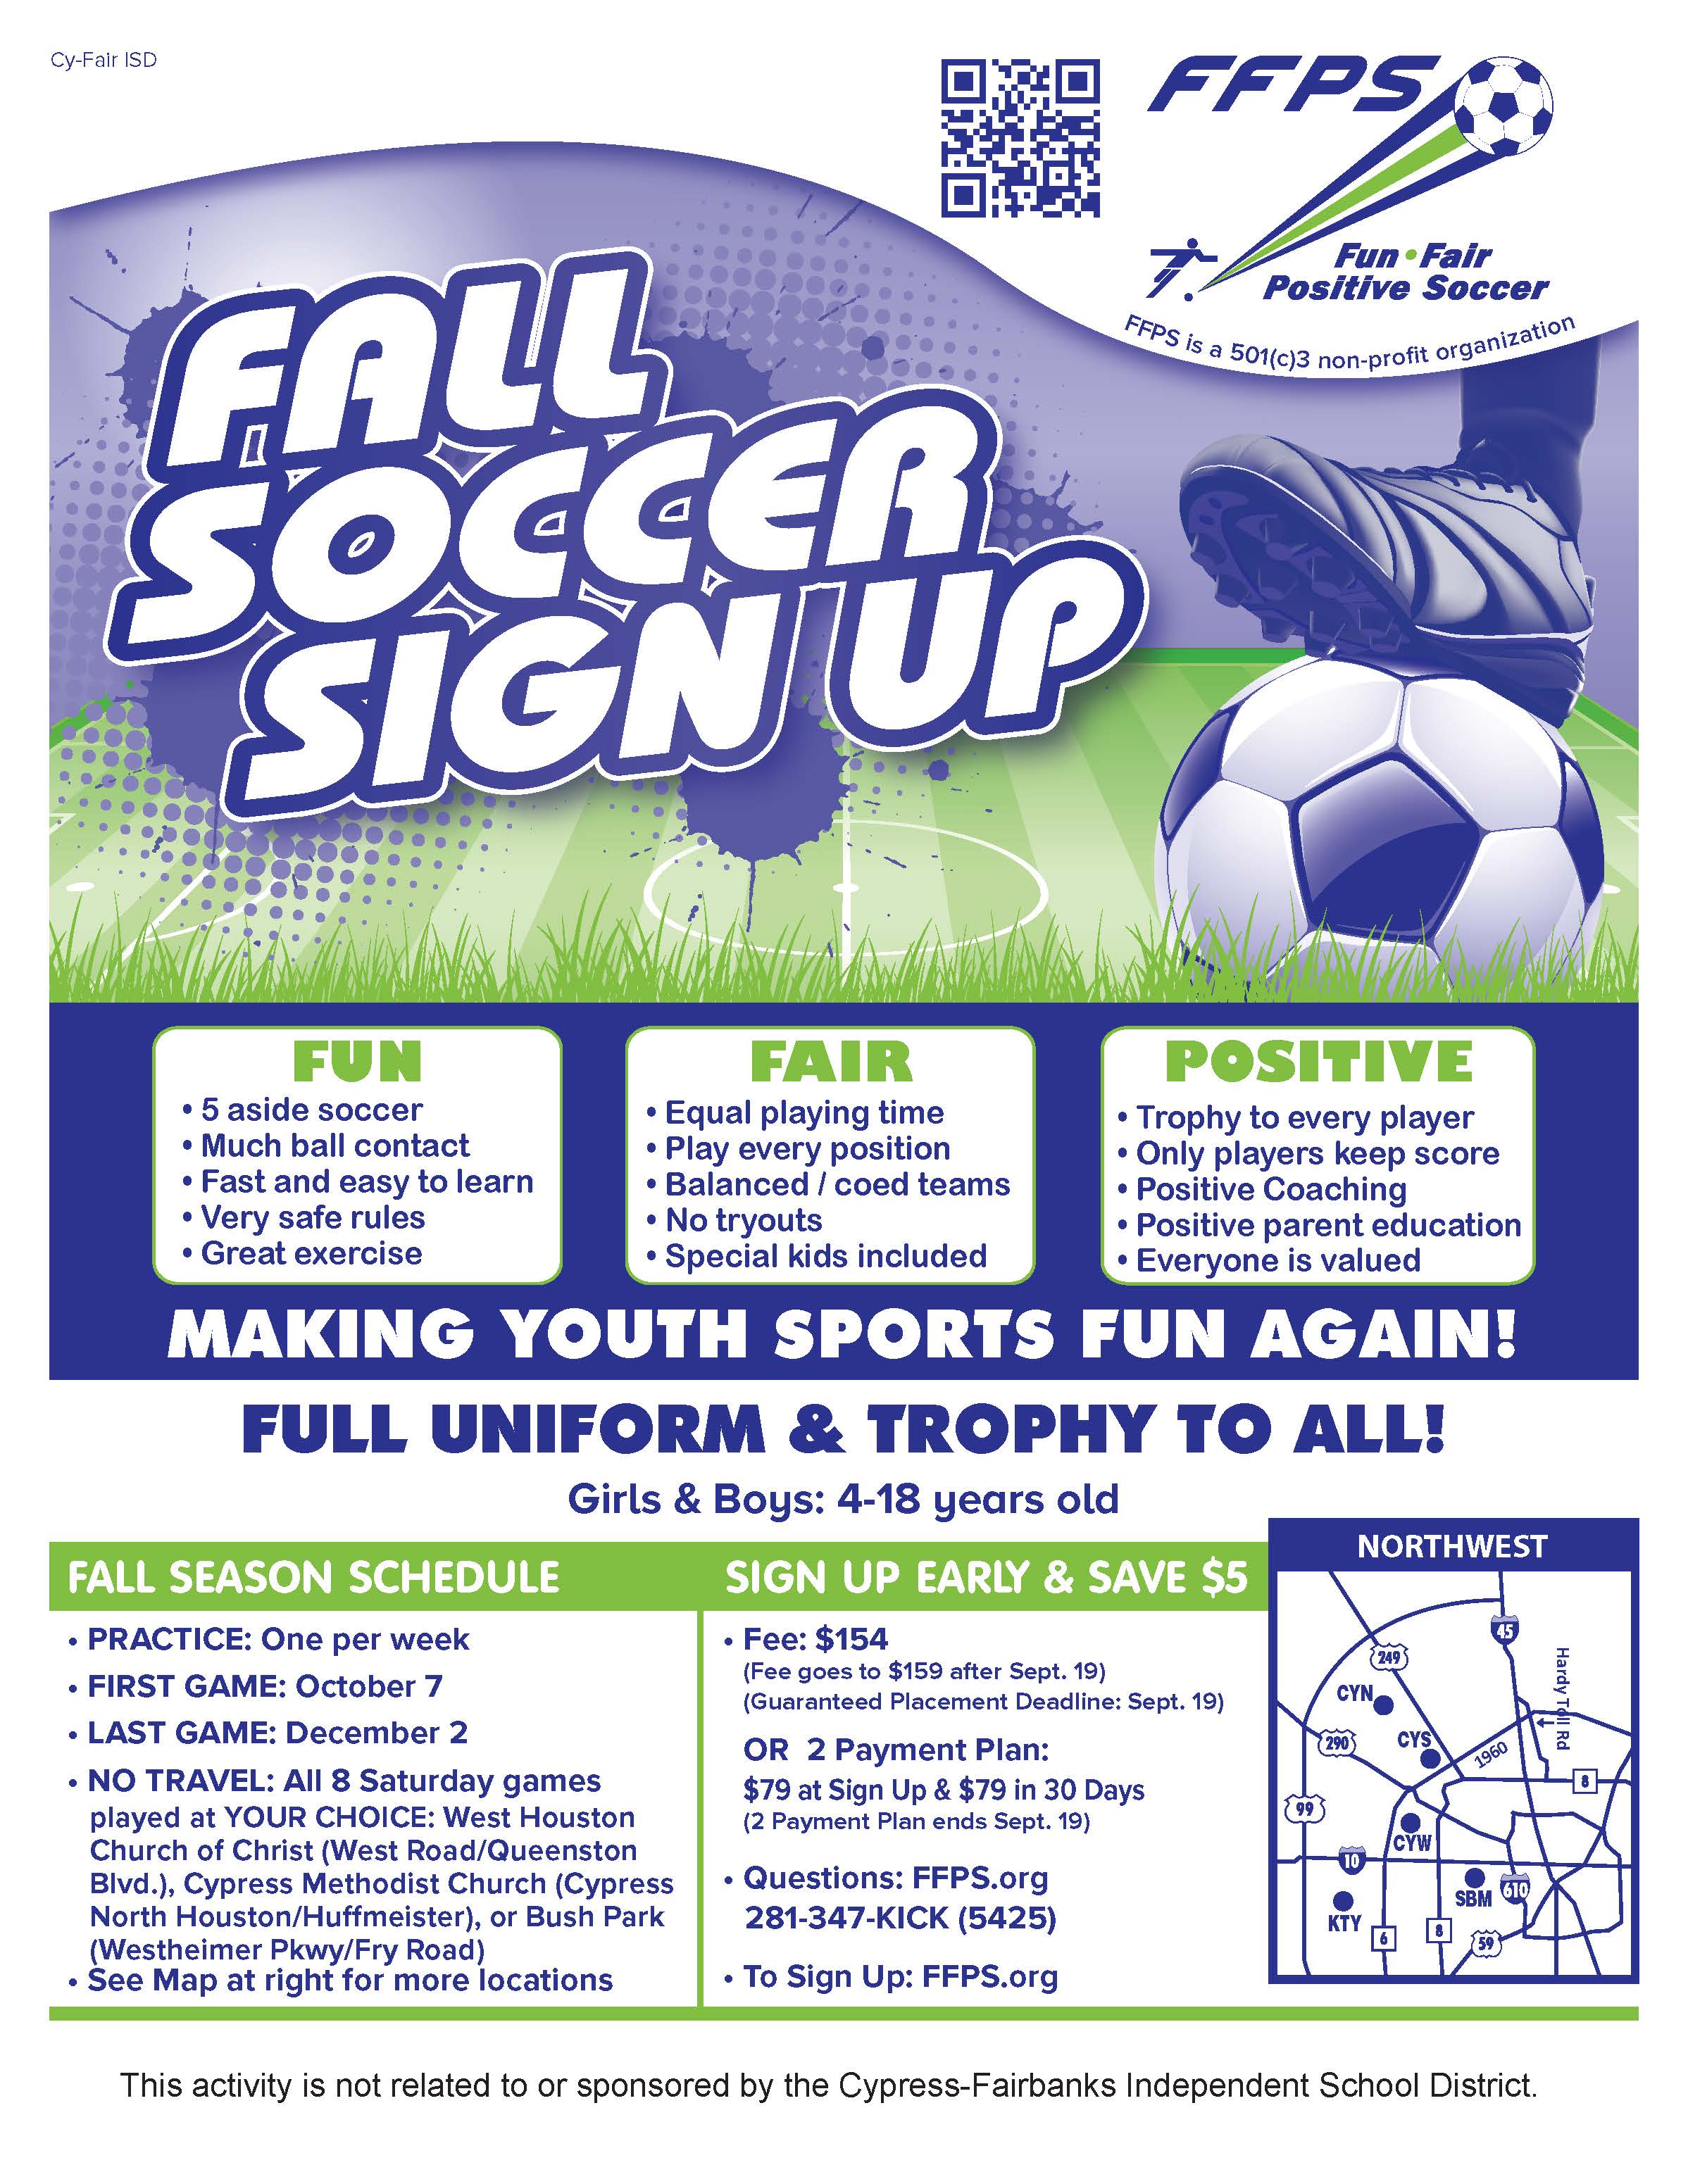 Fun Fair Positive Soccer - Fall Soccer Sign Up  Making youth sports fun again! Full uniform and trophy to all!  Girls and boys ages 4-18 Practice one day per week October 7-December 2 Fee: $154, $159 after September 19 Sign up early and save $5  www.FFPS.org 281-347-KICK (54250  This activity is not related to or sponsored by the Cypress-Fairbanks Independent School District.